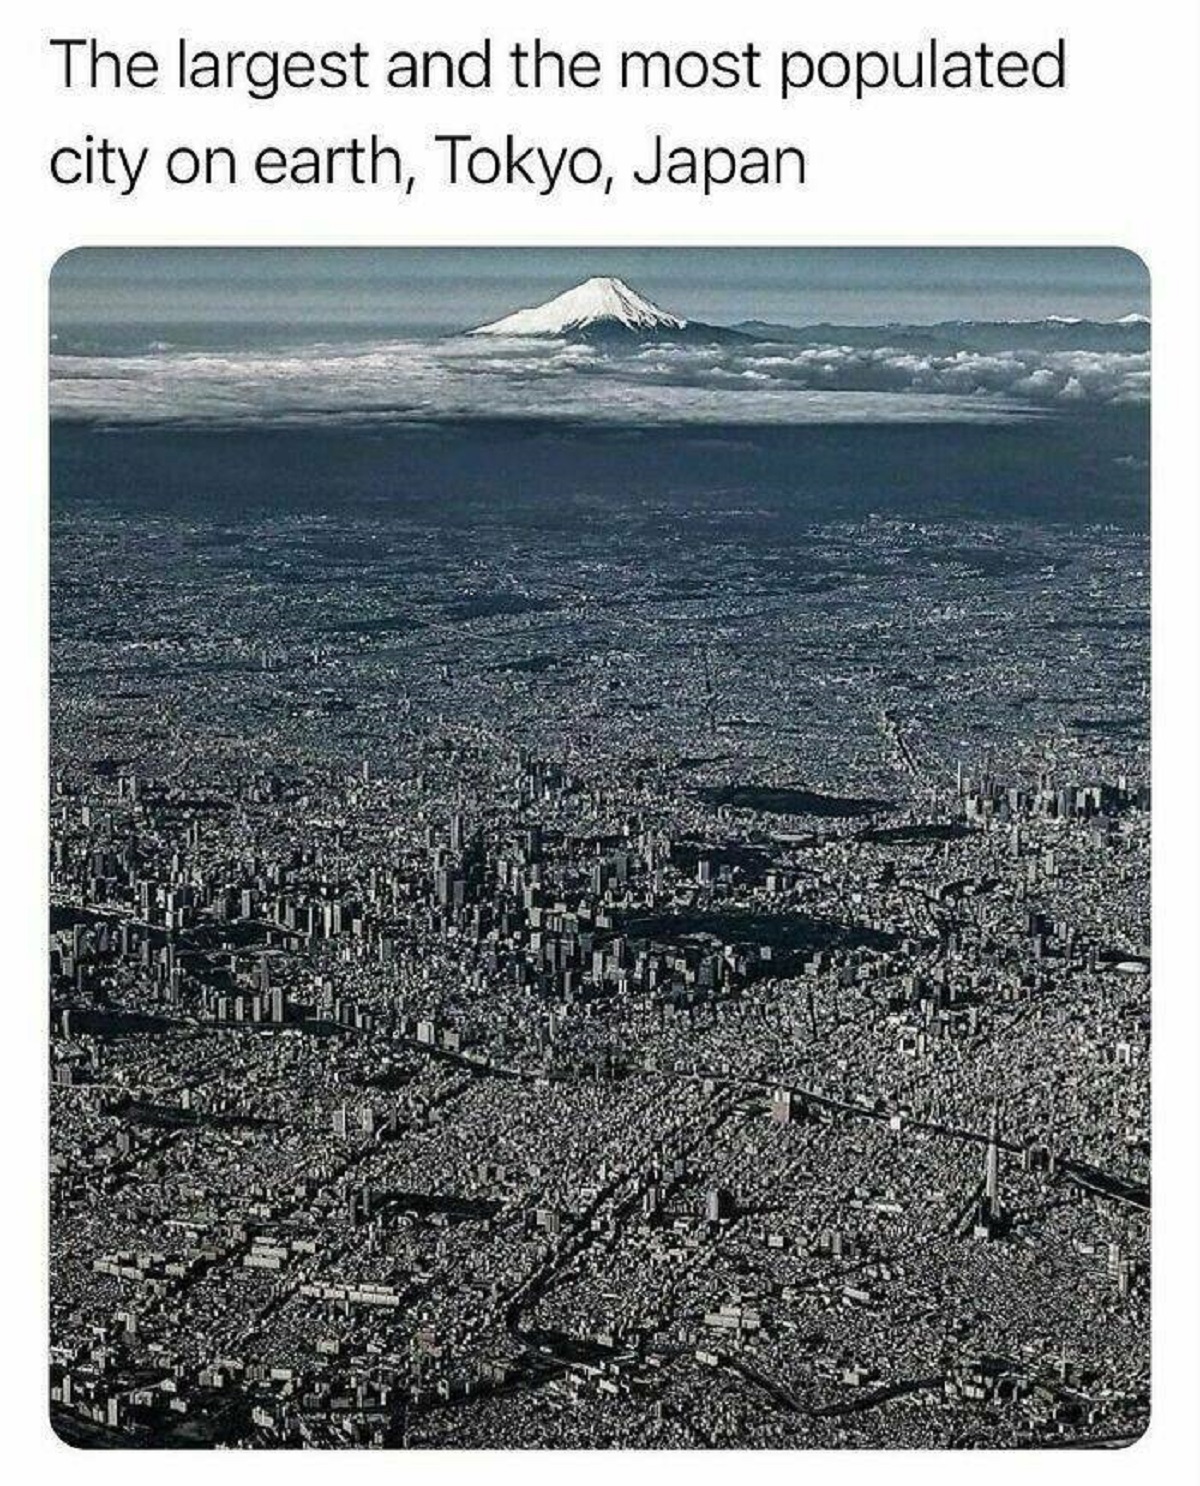 there are cities and then there is tokyo - The largest and the most populated city on earth, Tokyo, Japan